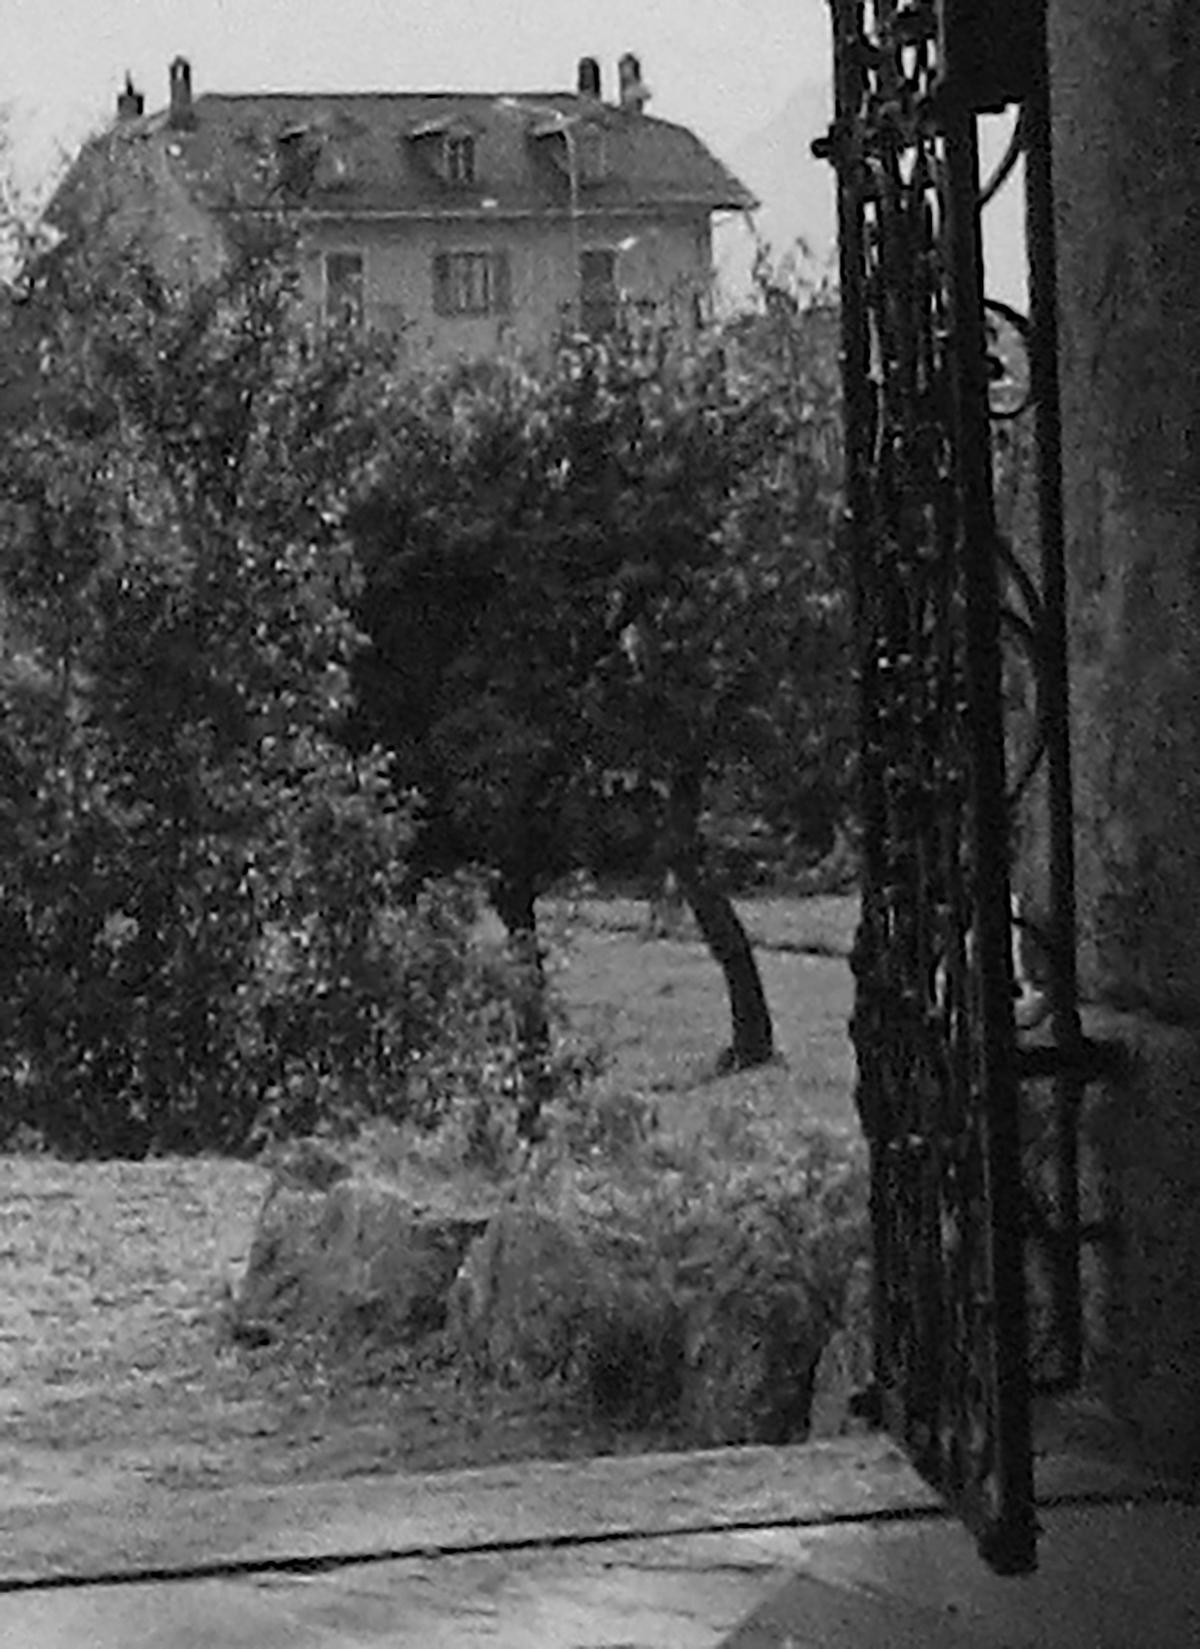 1960s Black and White Photograph of Roman Gate and Italian Grove with Chateau 1